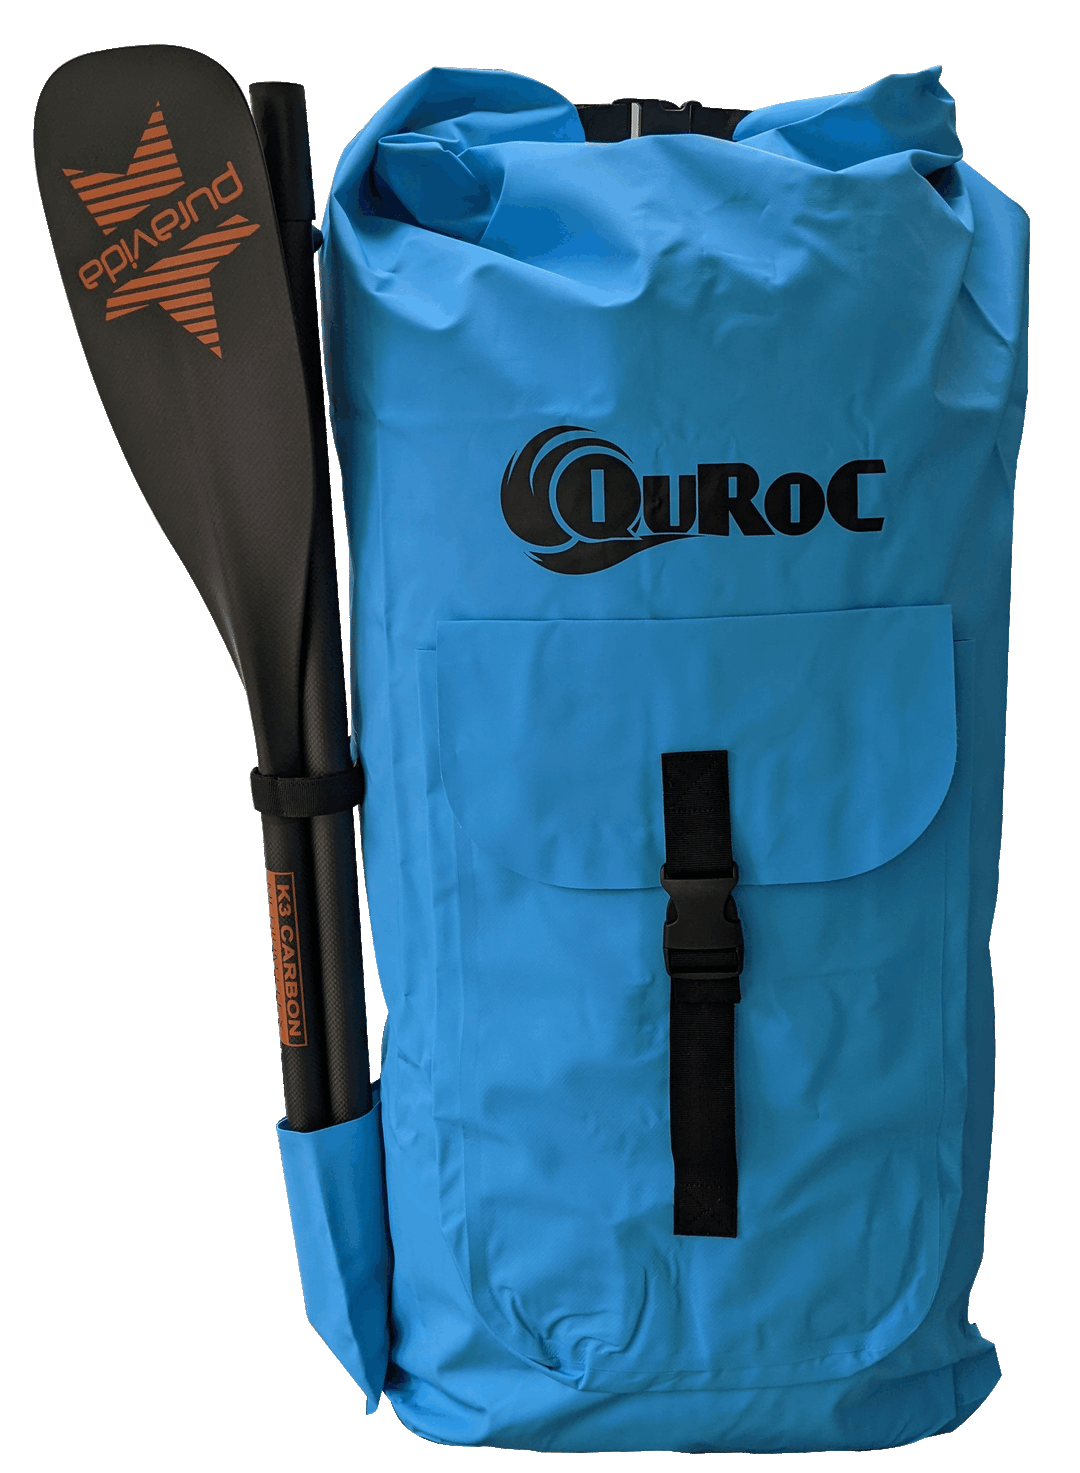 Paddle Board Dry Bag Backpack